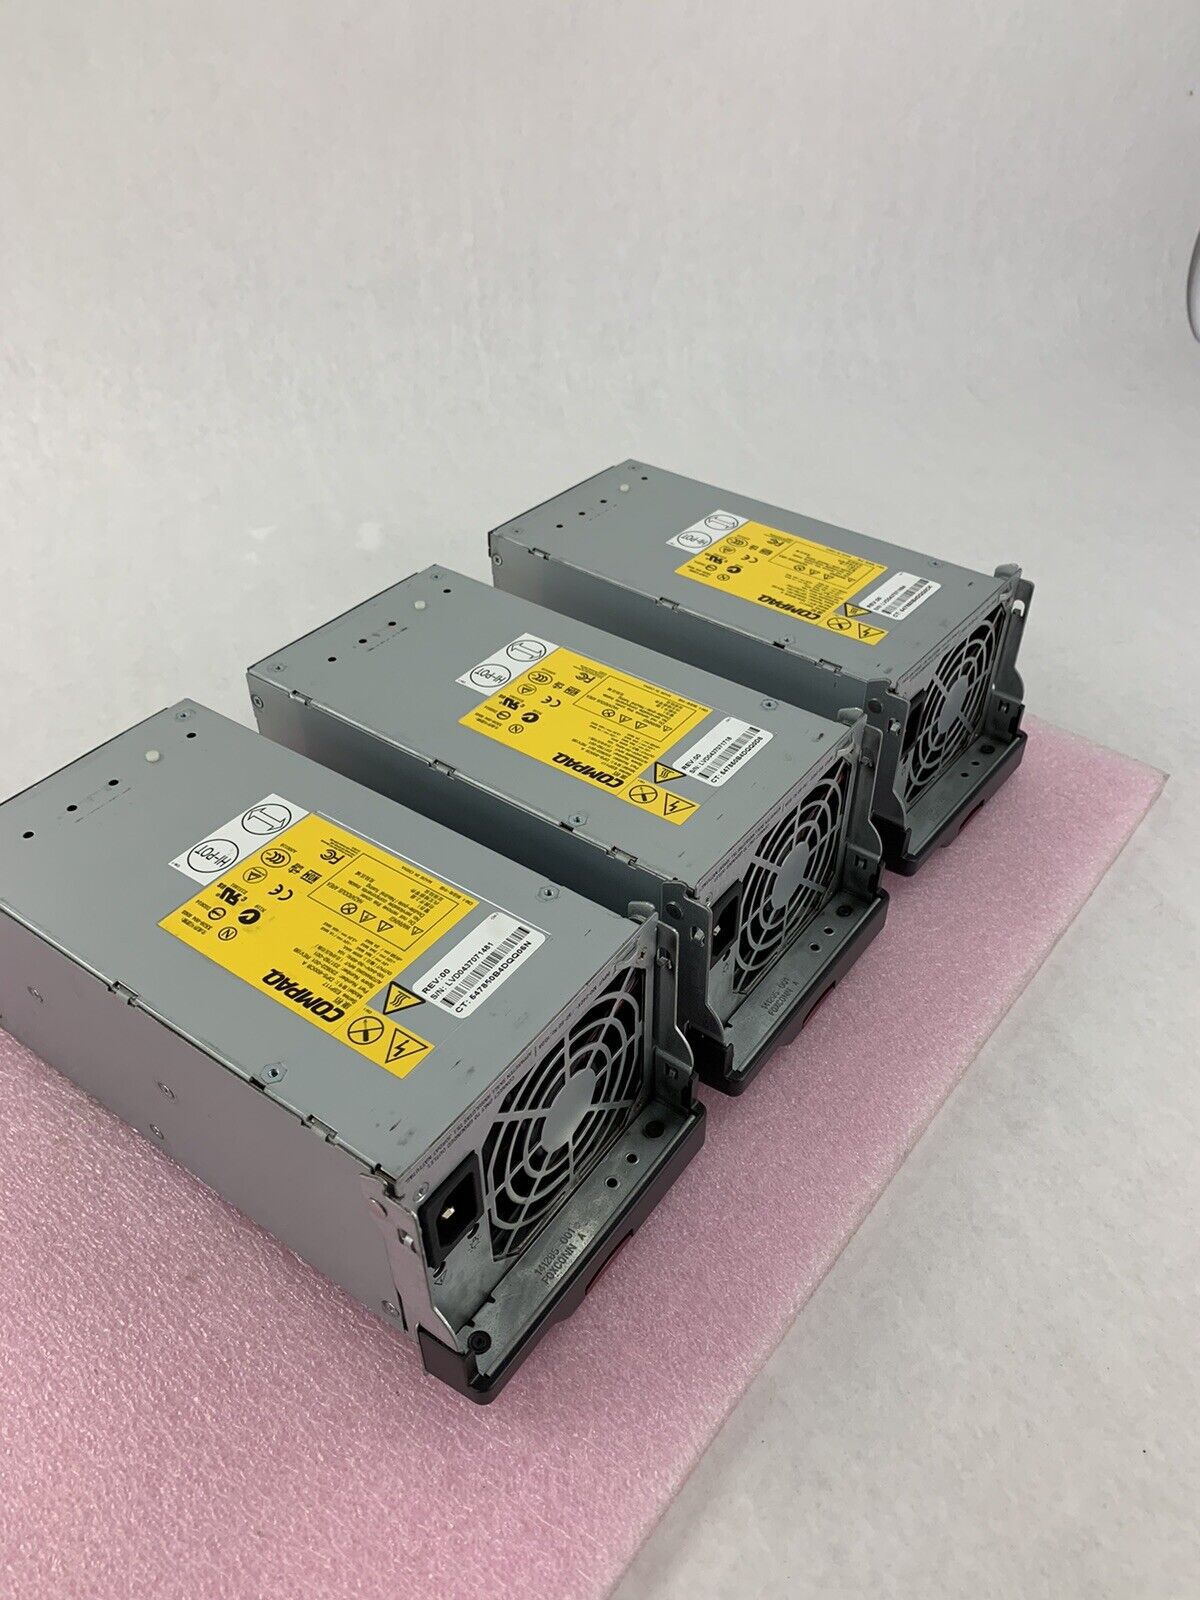 LOT OF 3 COMPAQ DPS-600CB A 230822-001 Power Supply Series